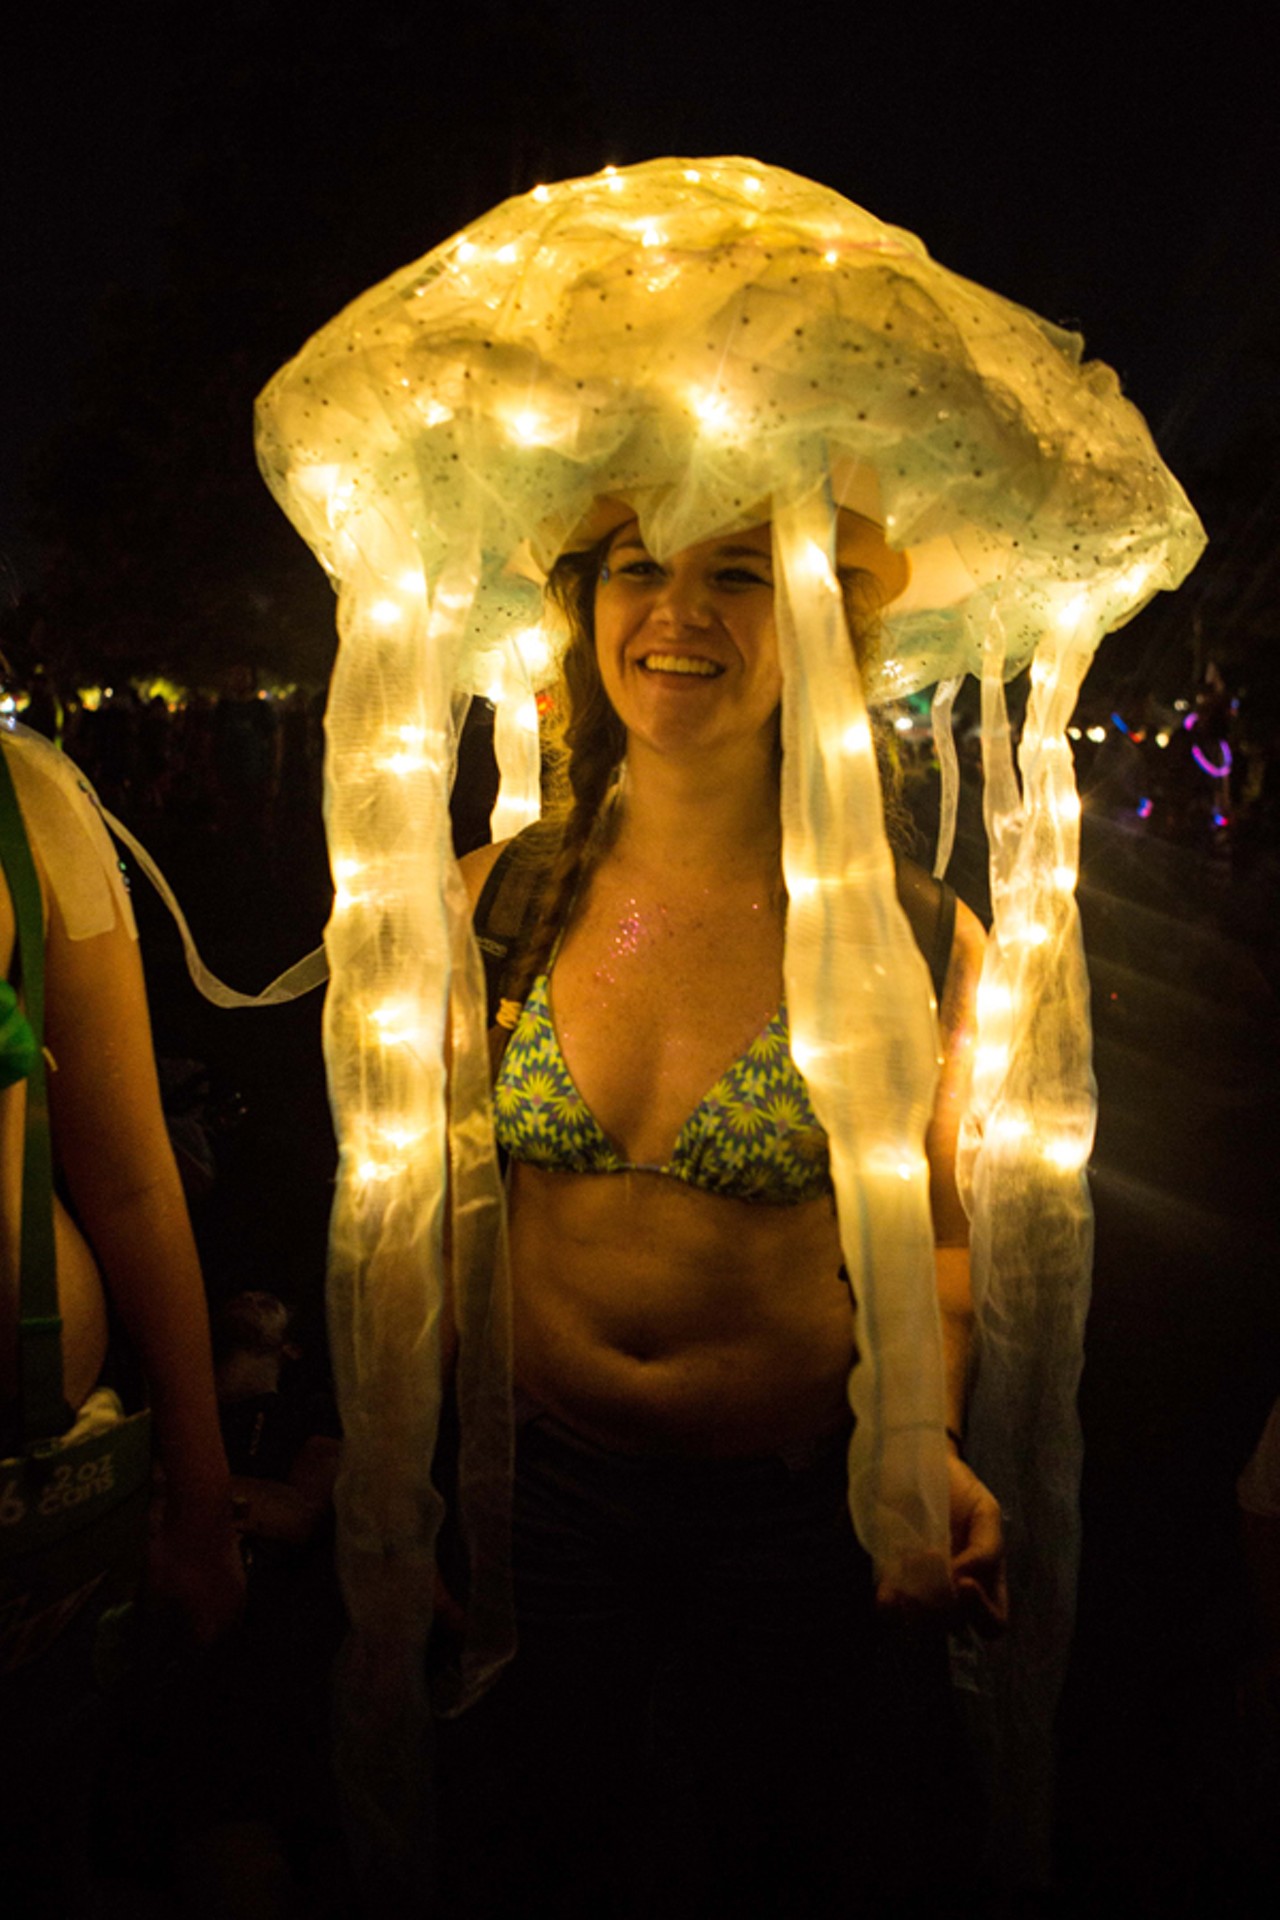 The People of Bonnaroo 2014